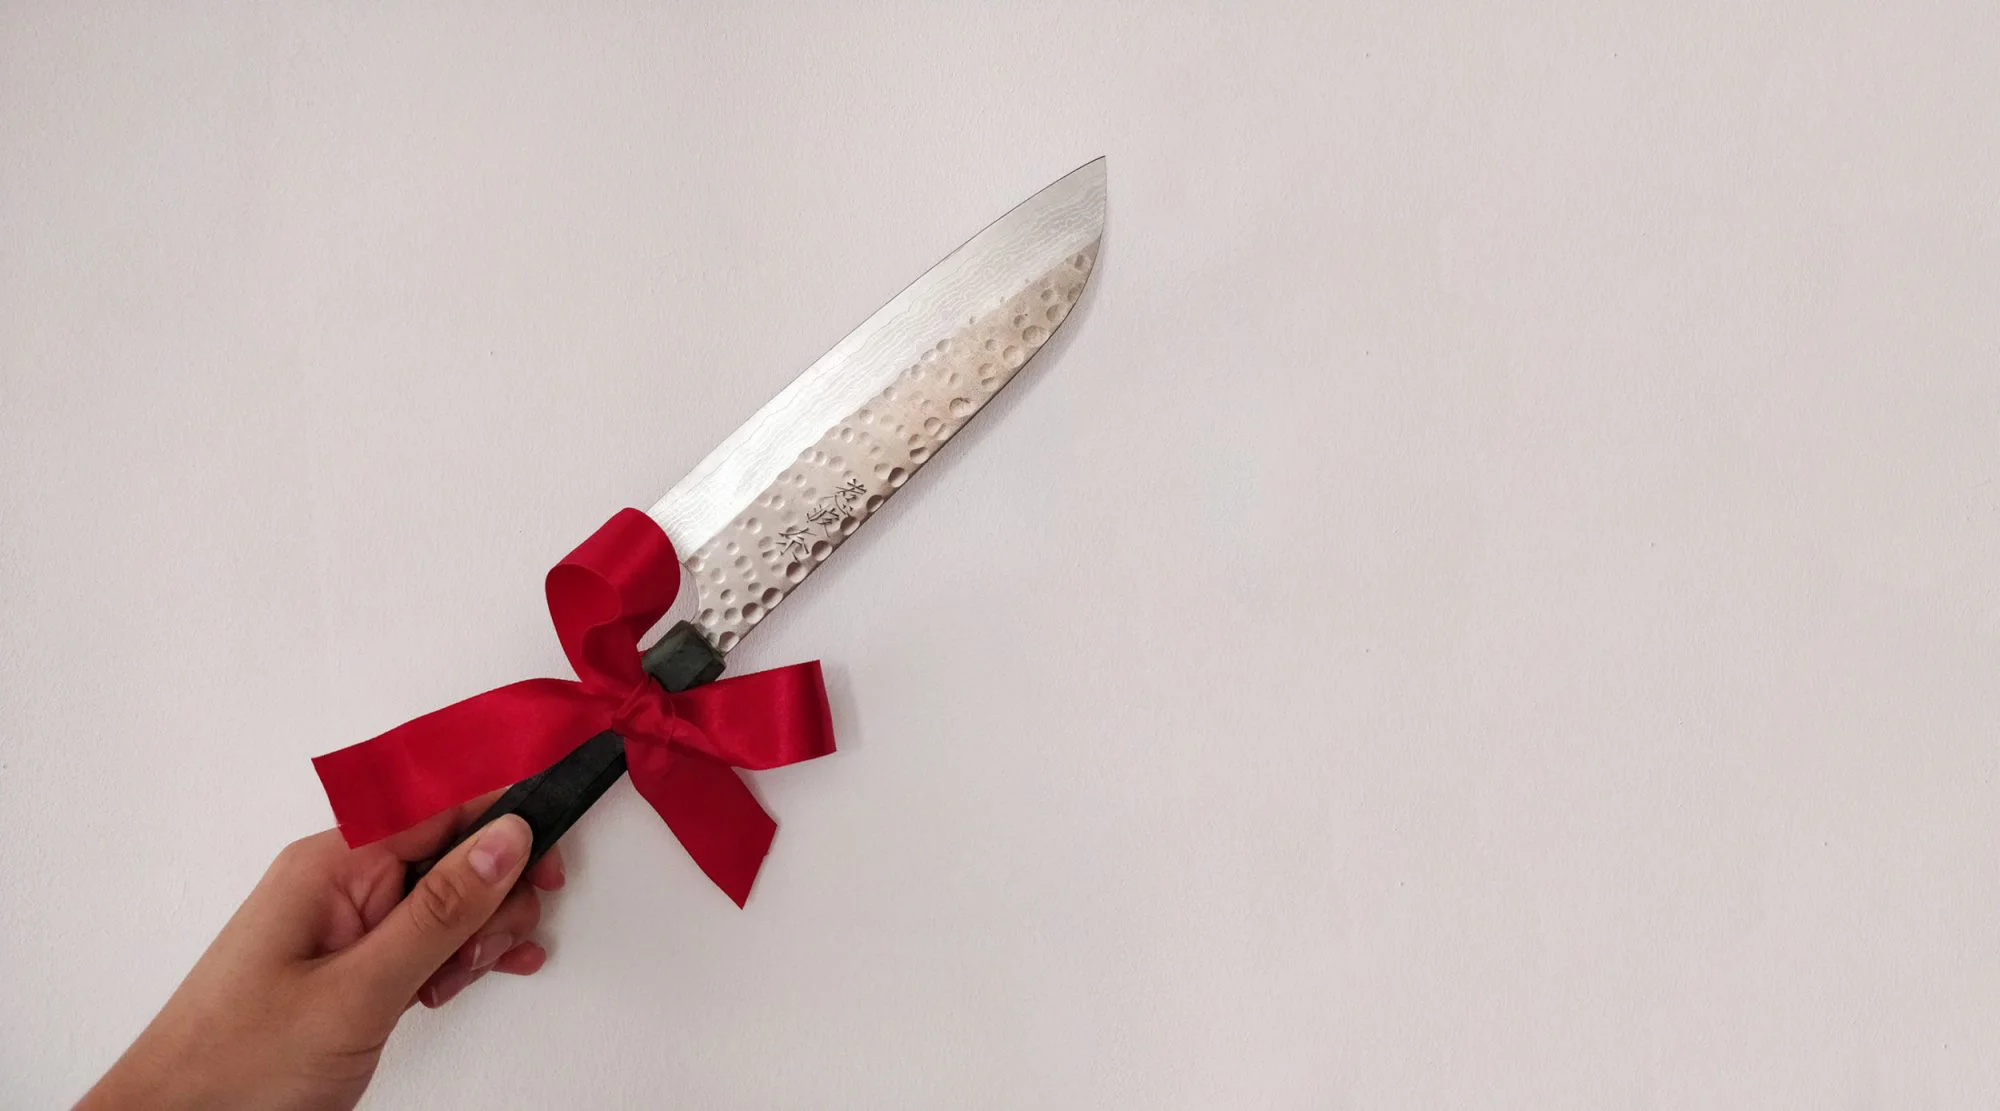 Is it Bad Luck to Give a Knife as a Gift?